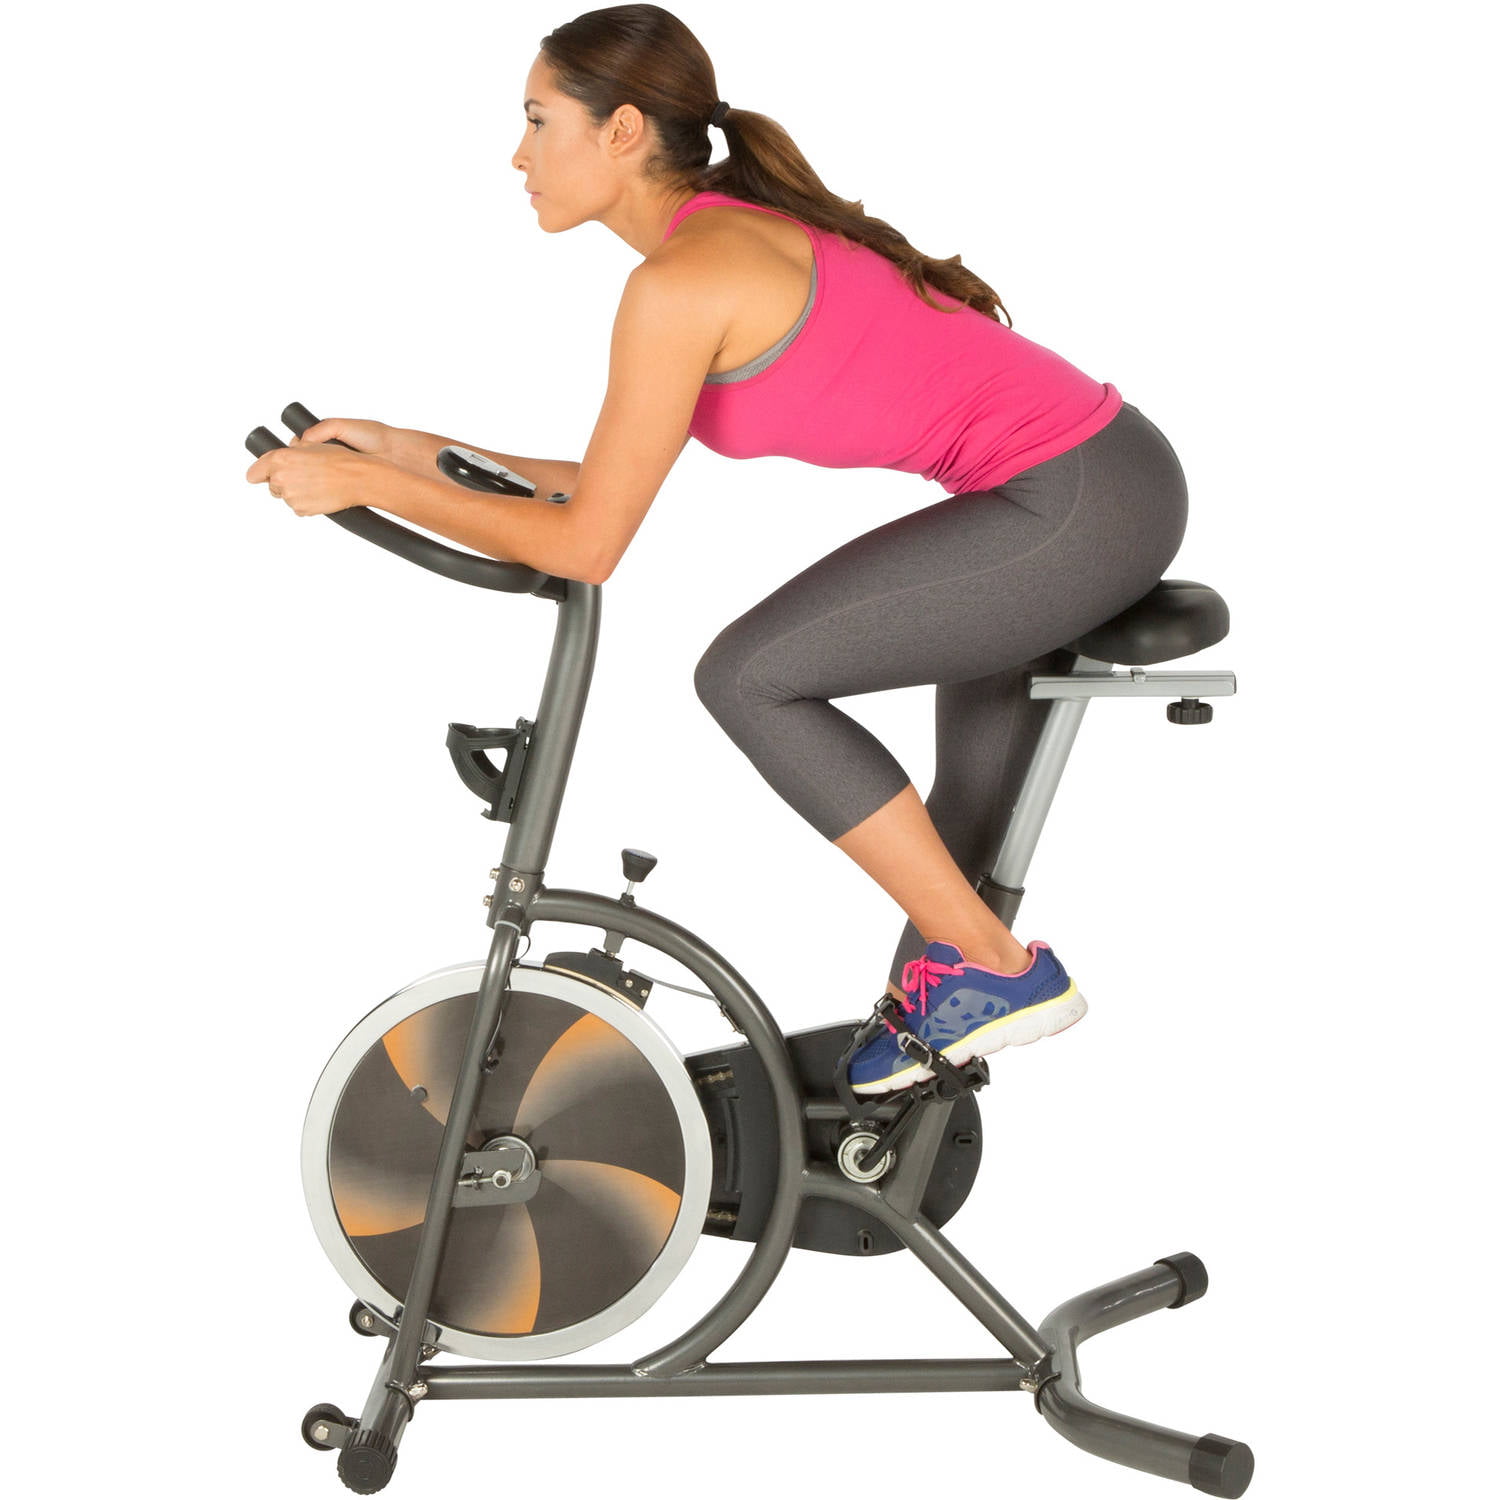 Costway Exercise Bike Cardio Fitness Gym Cycling Machine Gym pertaining to cycling machine with regard to Desire